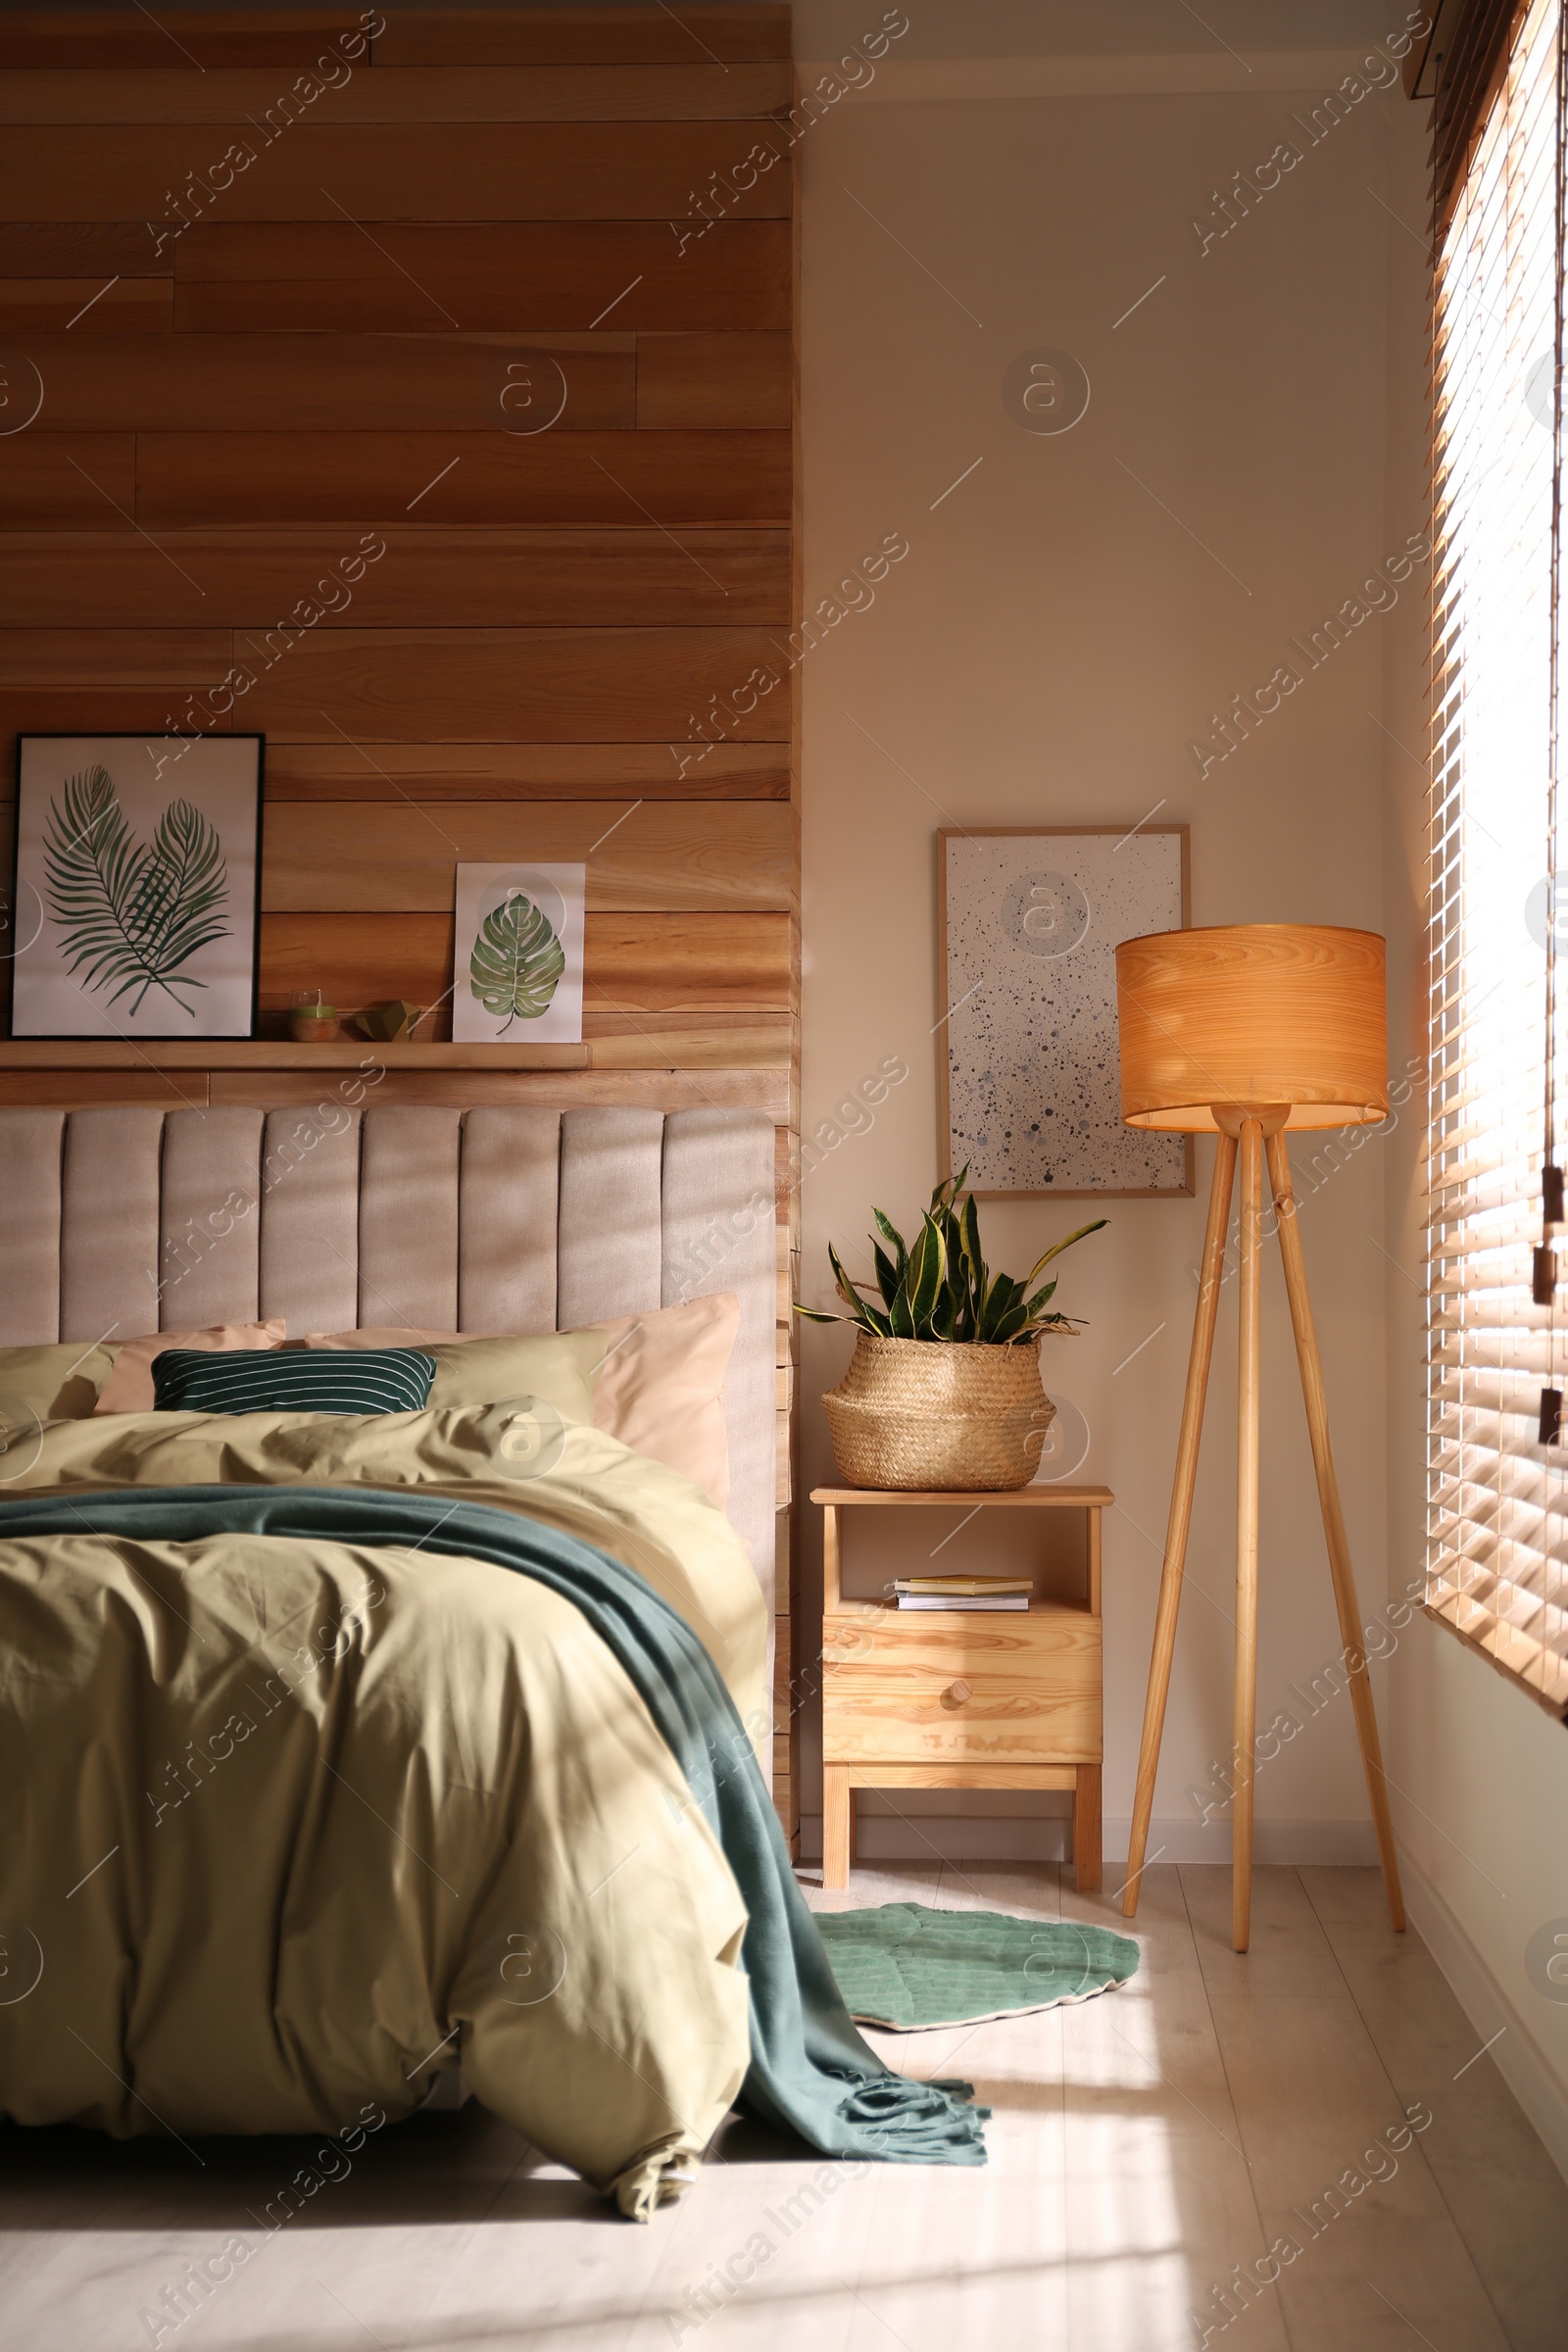 Photo of Comfortable bed with new pistachio linens in modern room interior